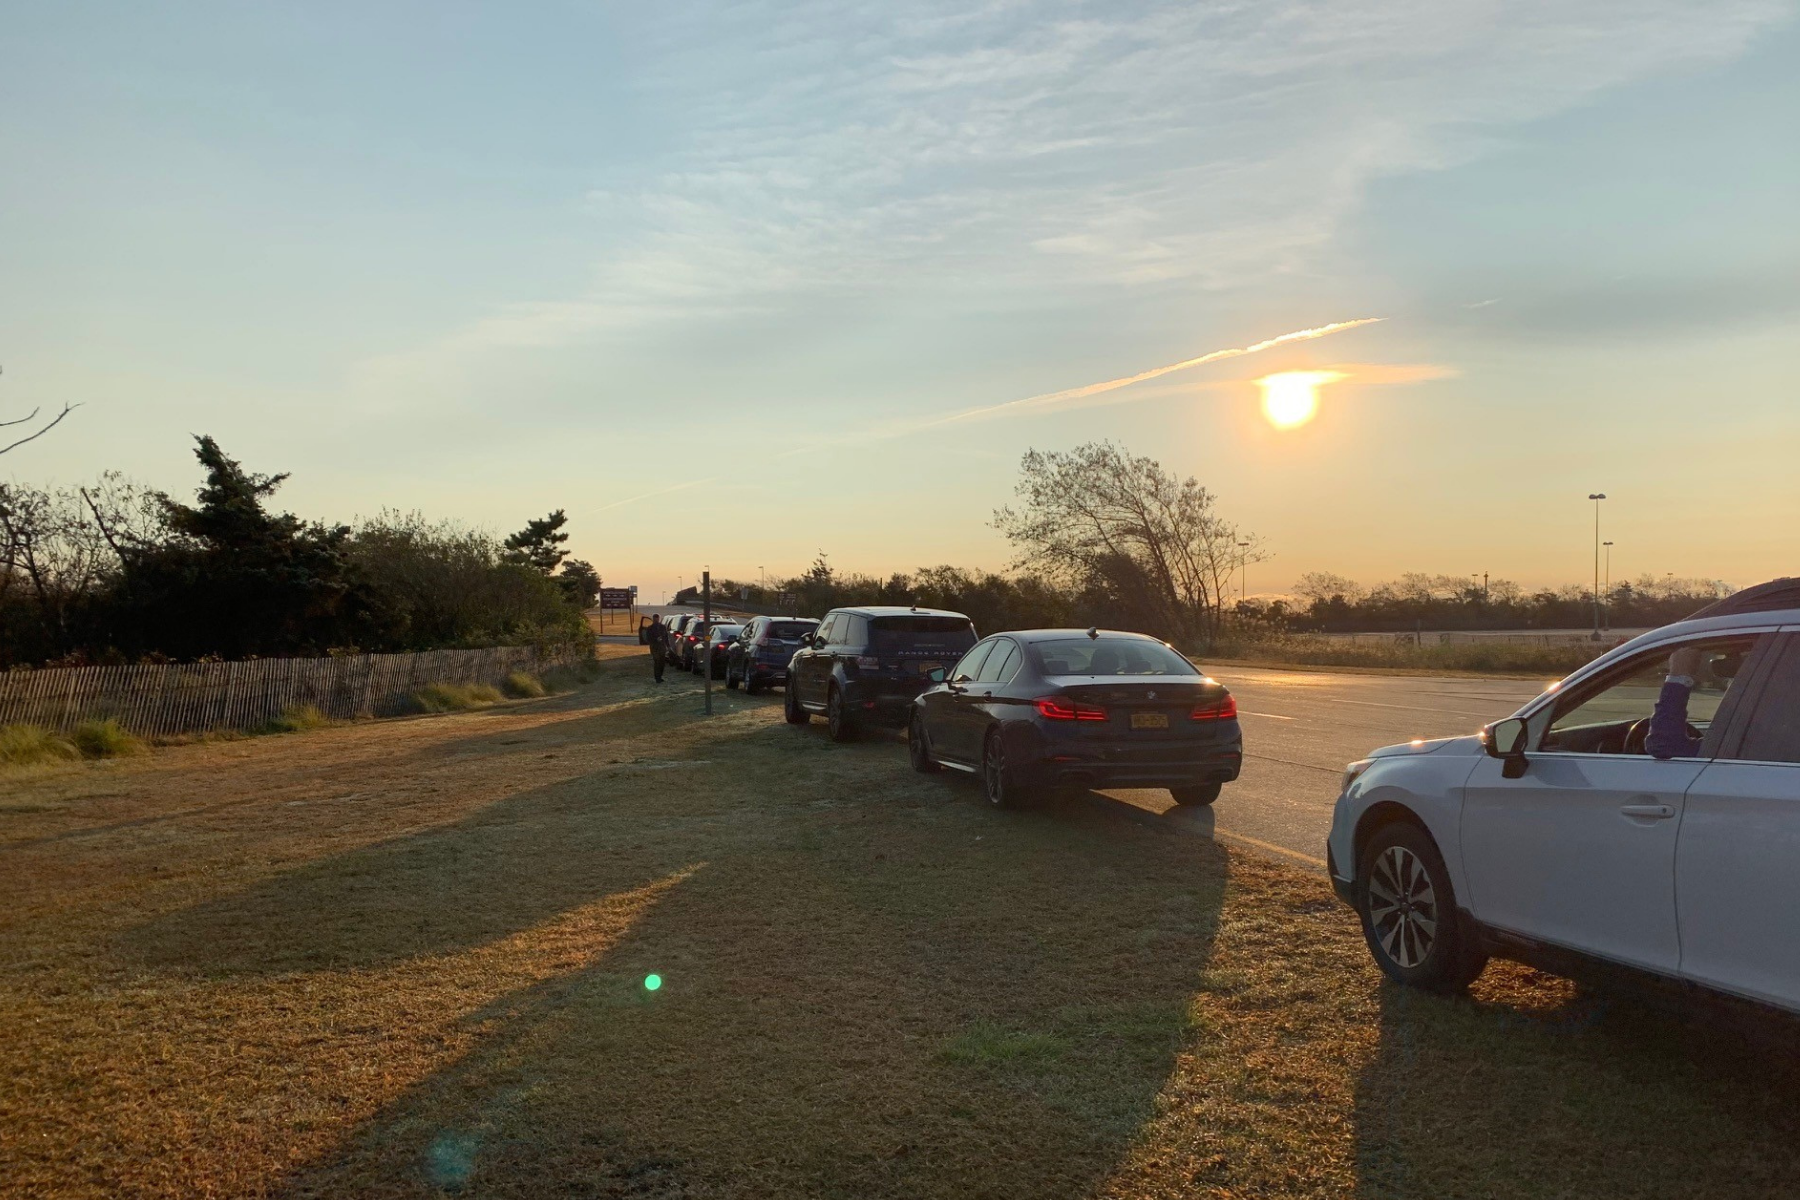 View of the line of NYBRA team cars with sun rising in the background at the Making Strides 2020 Drive Through Experience at Jones Beach.